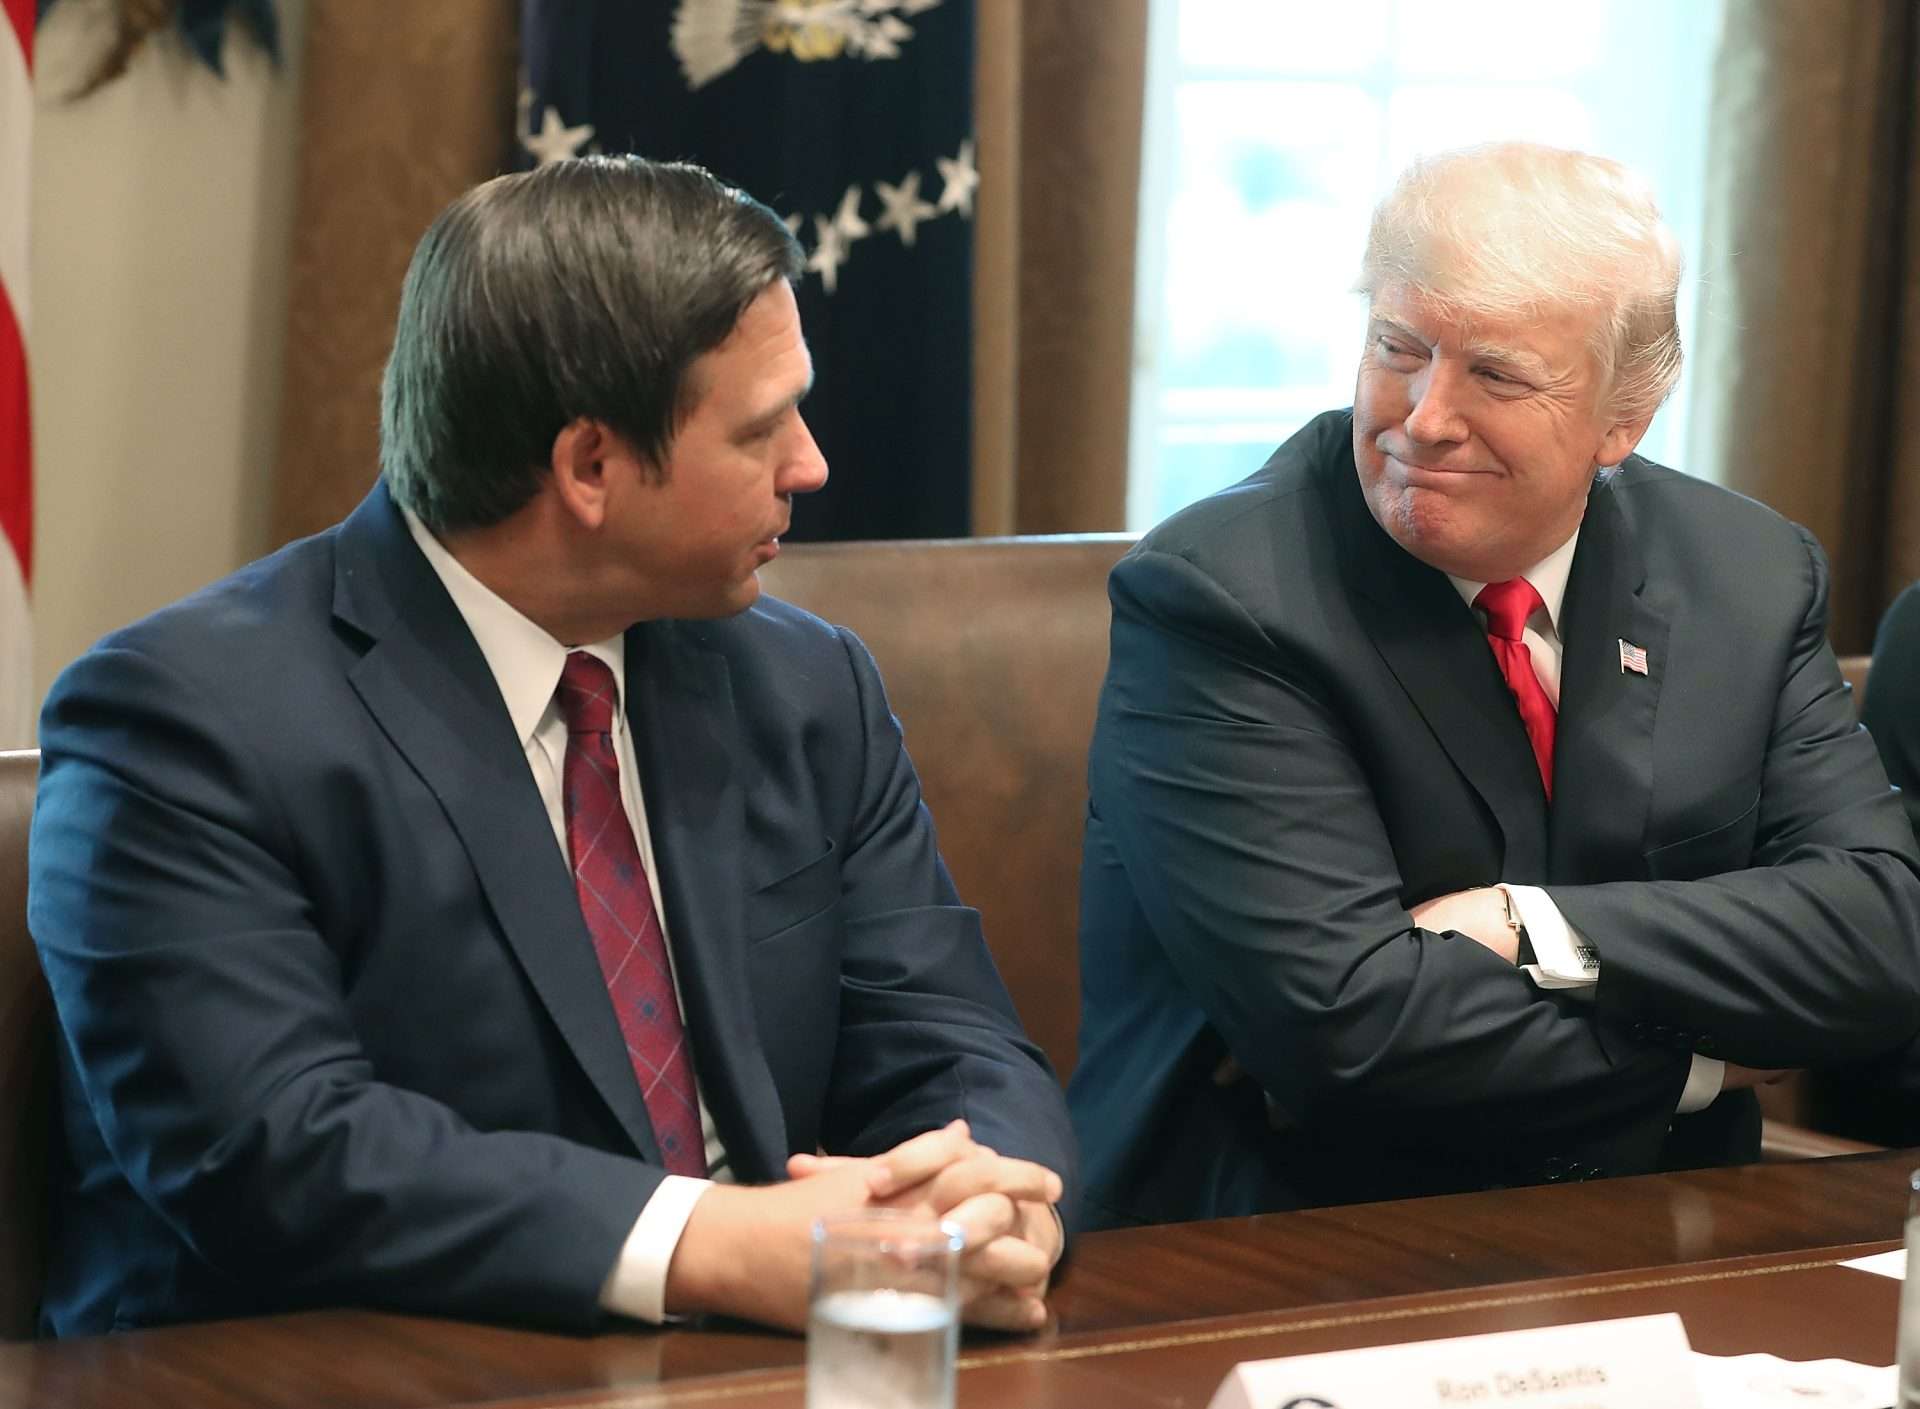 GOP leaders concerned with partisan divide over Trump's disagreement with DeSantis